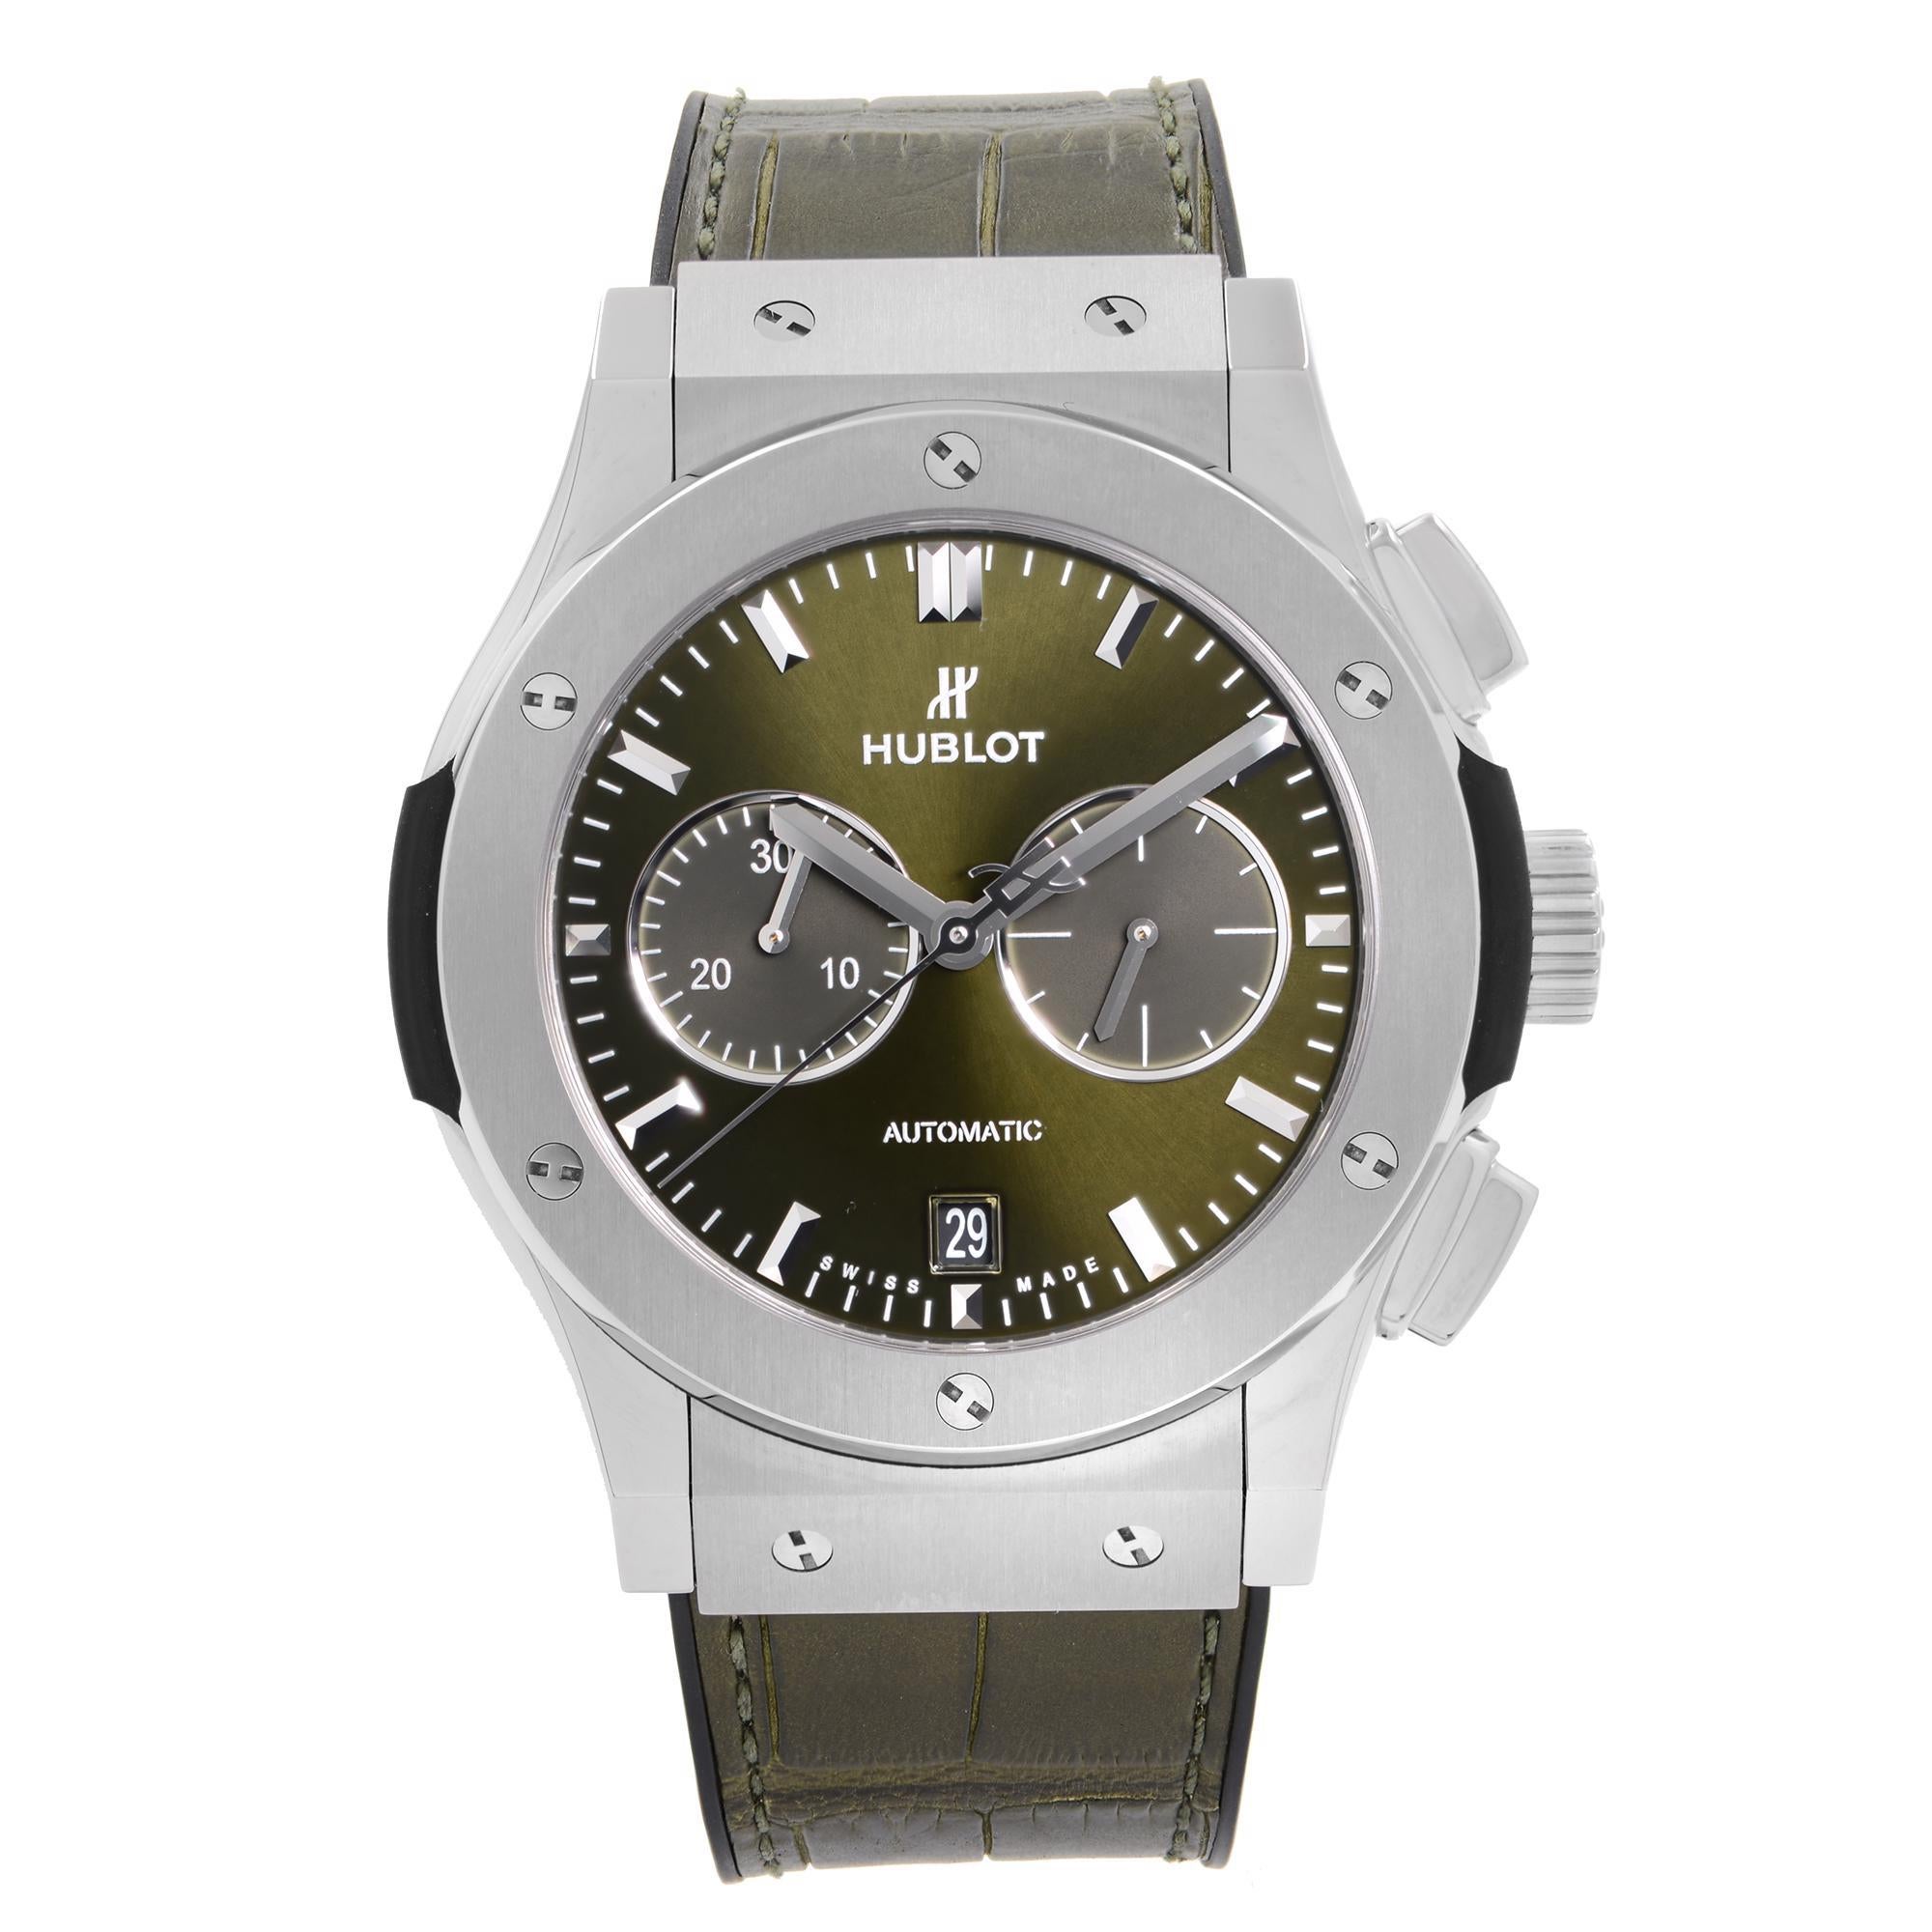 Unworn Hublot Classic Fusion 42mm Chronograph Titanium Green Dial Mens Automatic Watch 541.NX.8970.LR. This beautiful Timepiece is Powered by Mechanical (Automatic) Movement with exceptional features: Satin-finished / polished titanium case with a